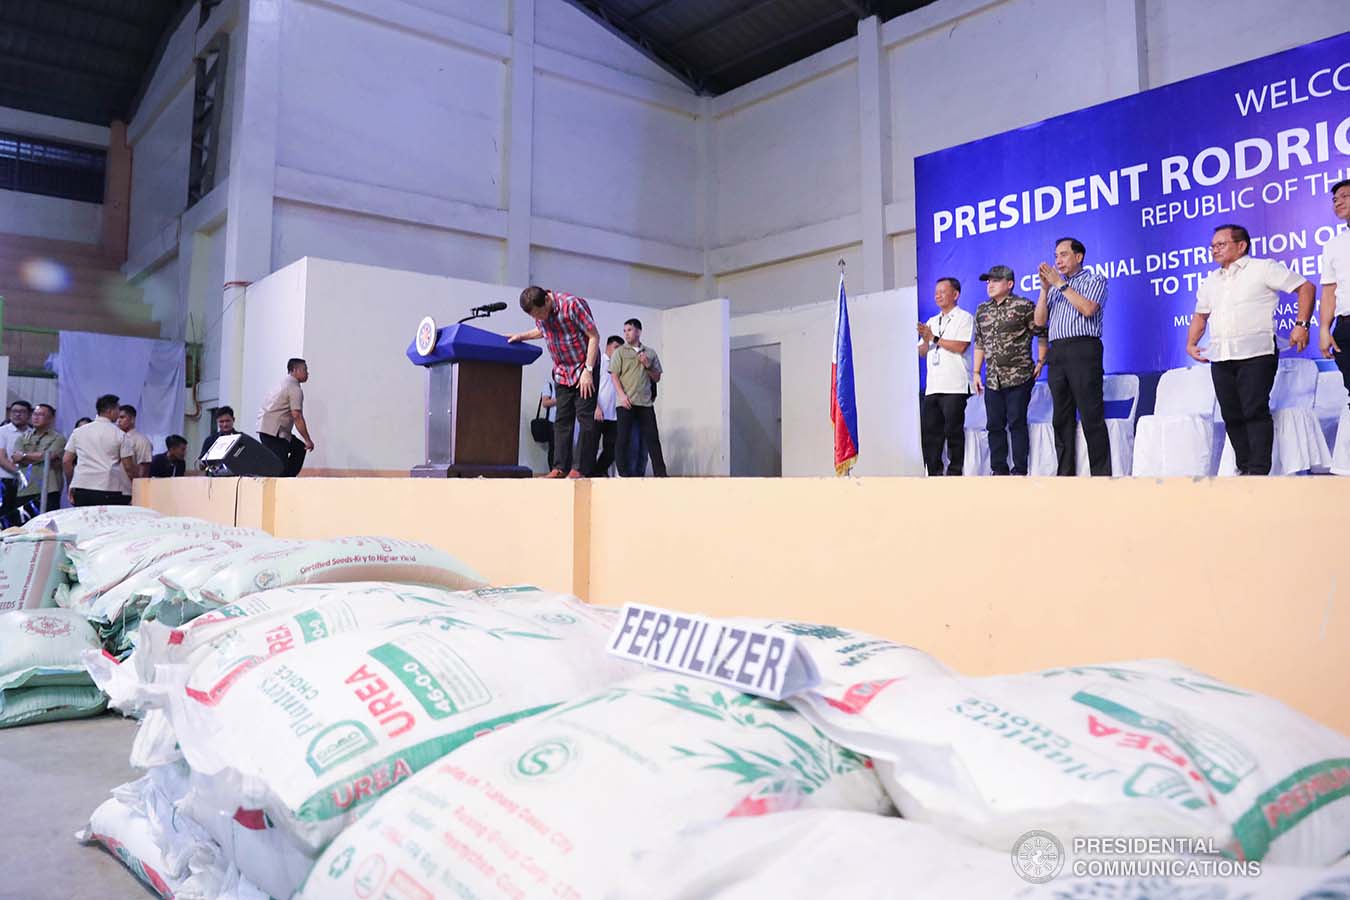 President Rodrigo Roa Duterte takes a bow after delivering a speech during the ceremonial distribution of agricultural assistance to the farmers of Region 12 at the Pigcawayan Municipal Gymnasium in Cotabato on January 10, 2020. With the President are Senator Christopher "Bong" Go and Agriculture Secretary William Dar. ROBINSON NIÑAL JR./PRESIDENTIAL PHOTO